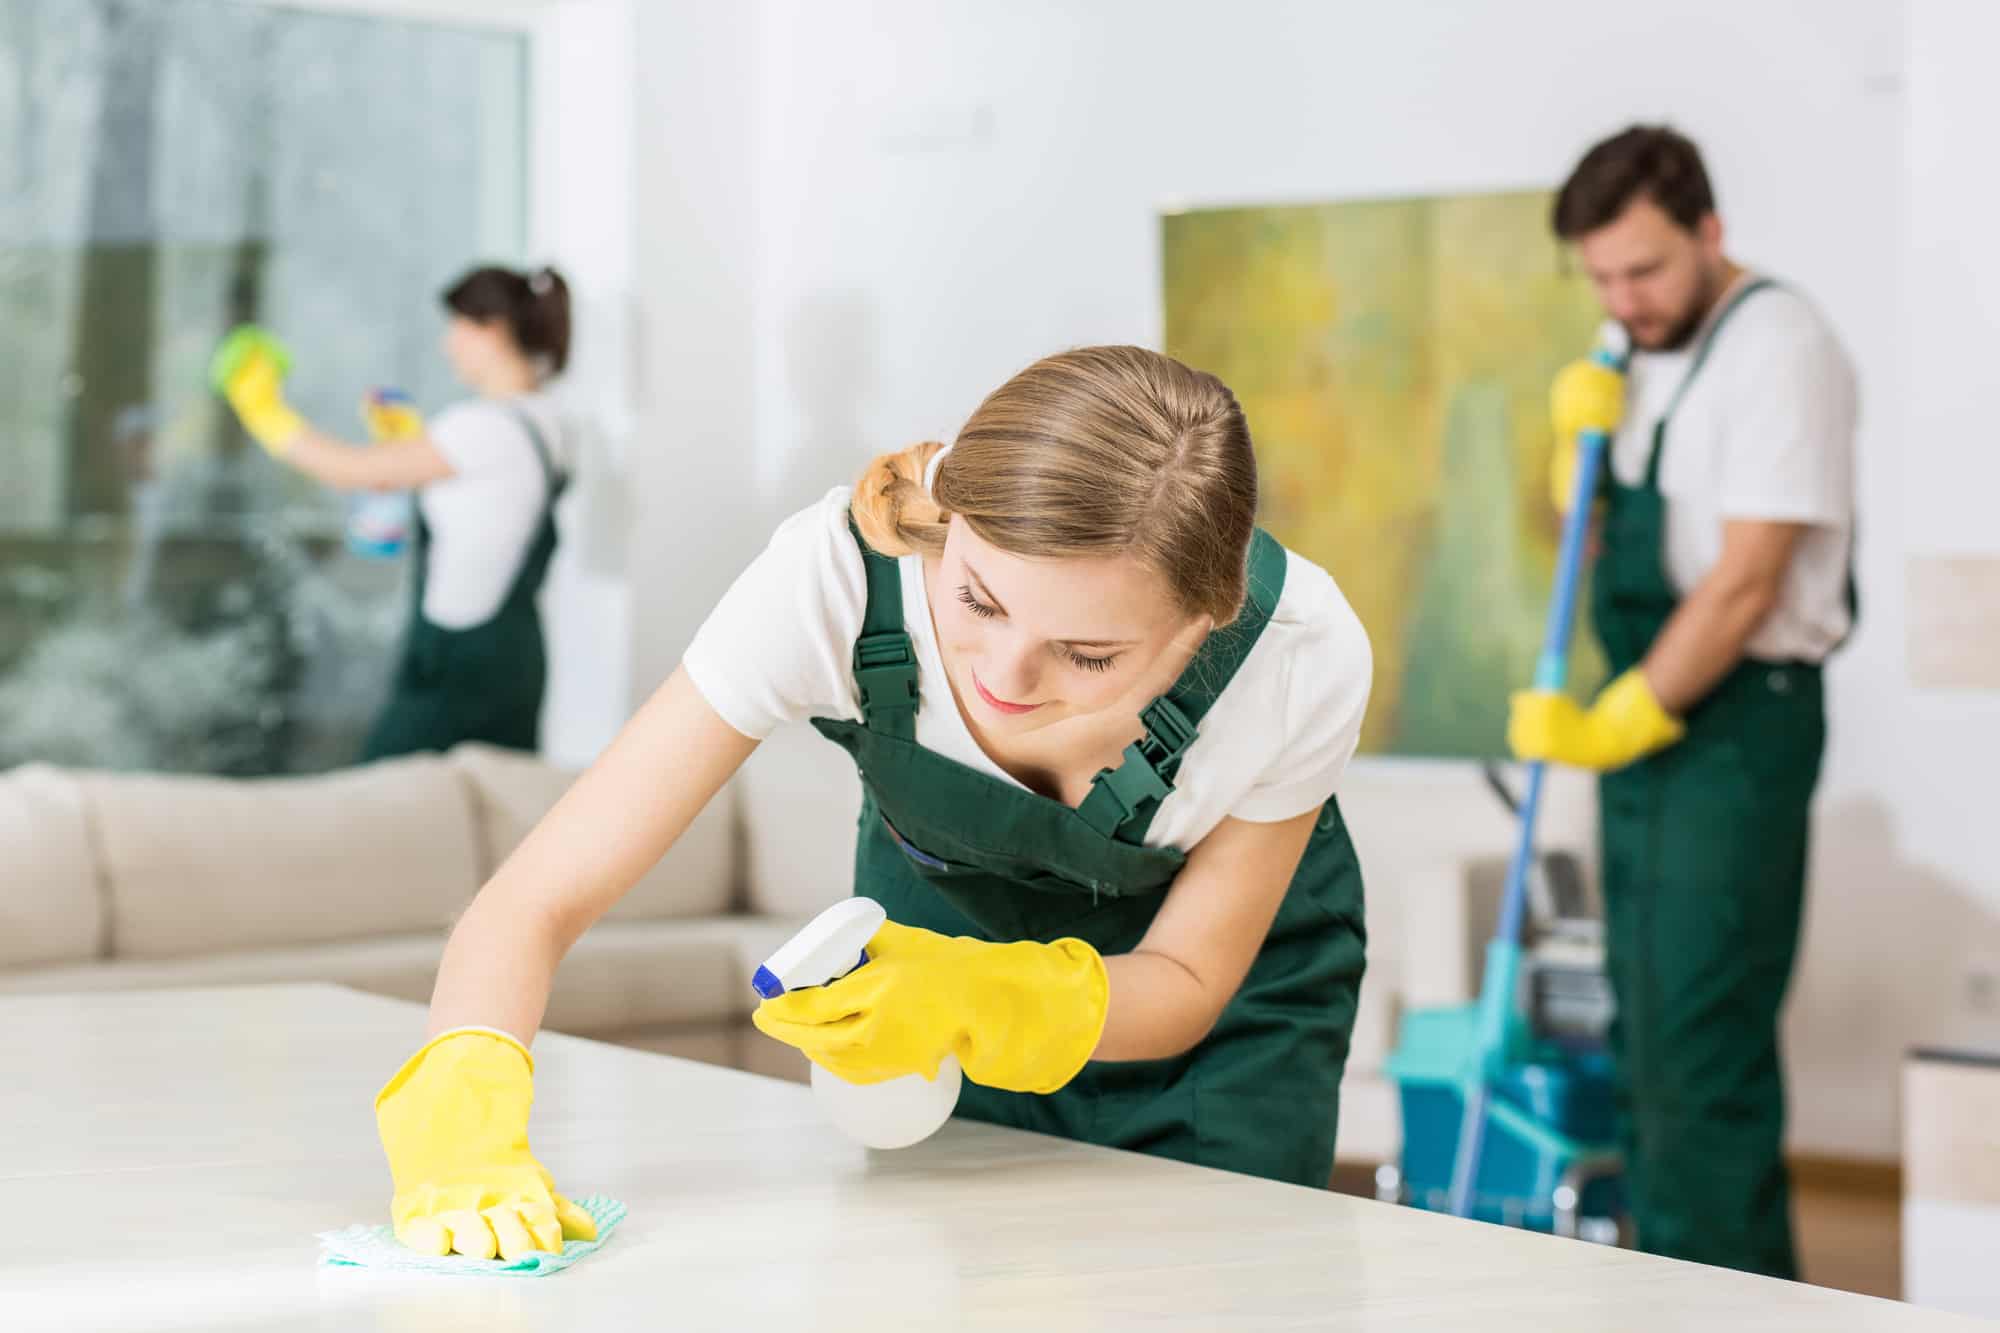 business cleaning service